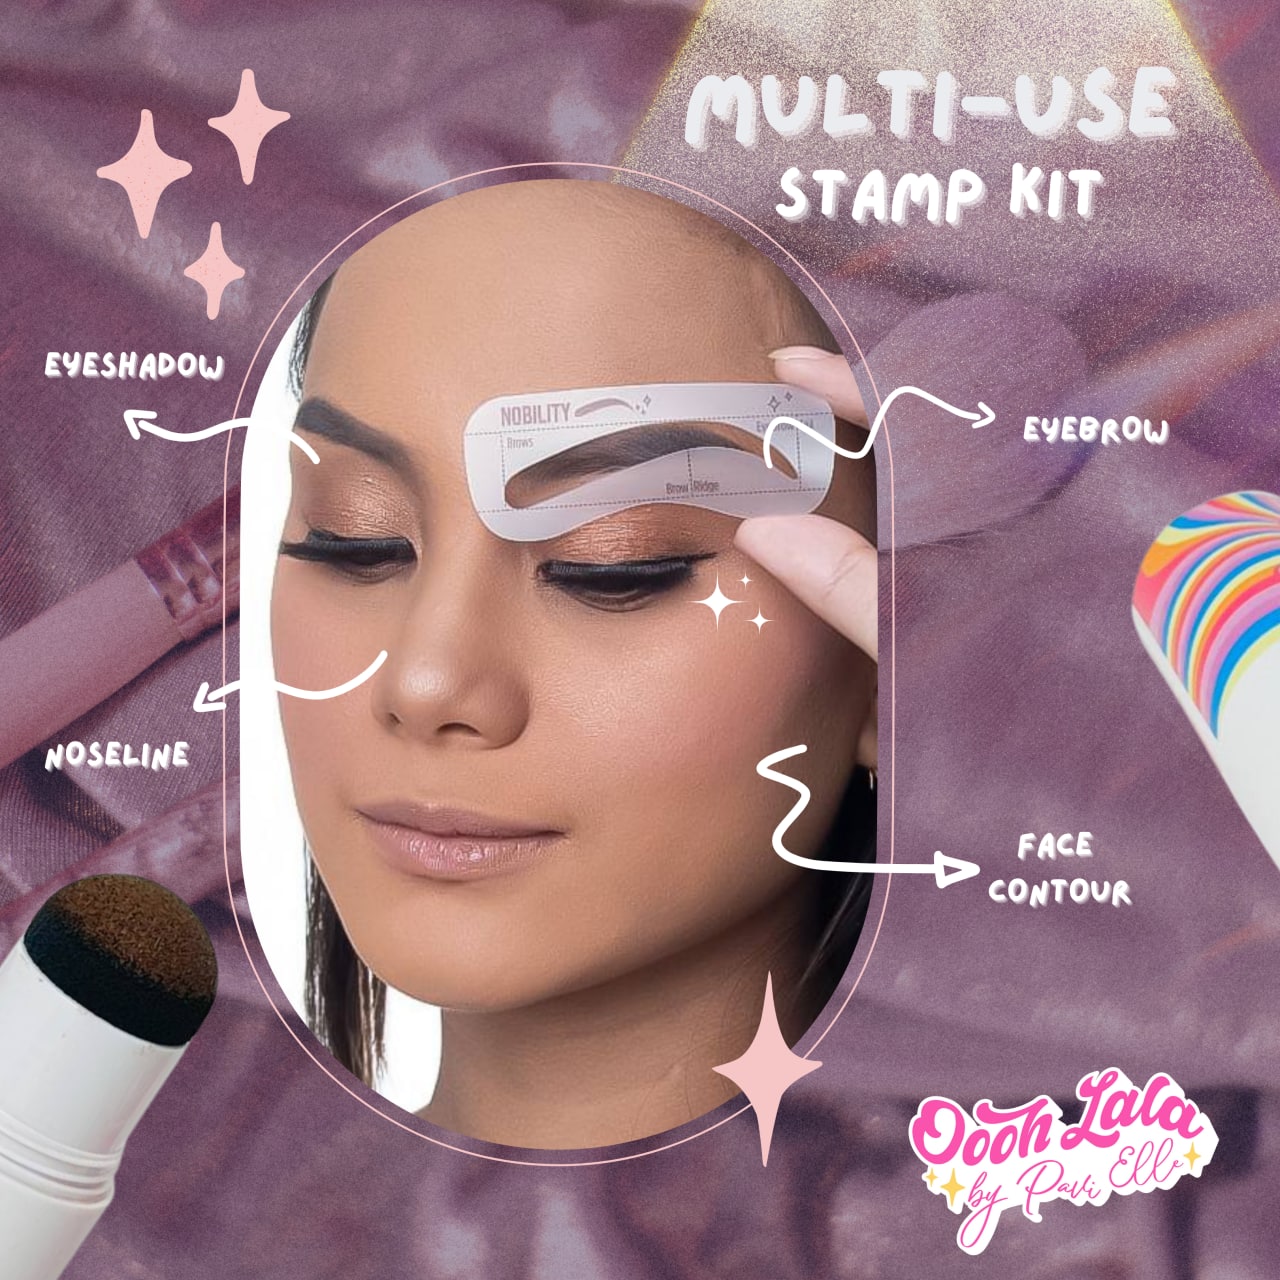 Oooh Lala by Pavi Elle Brow Stamp Kit